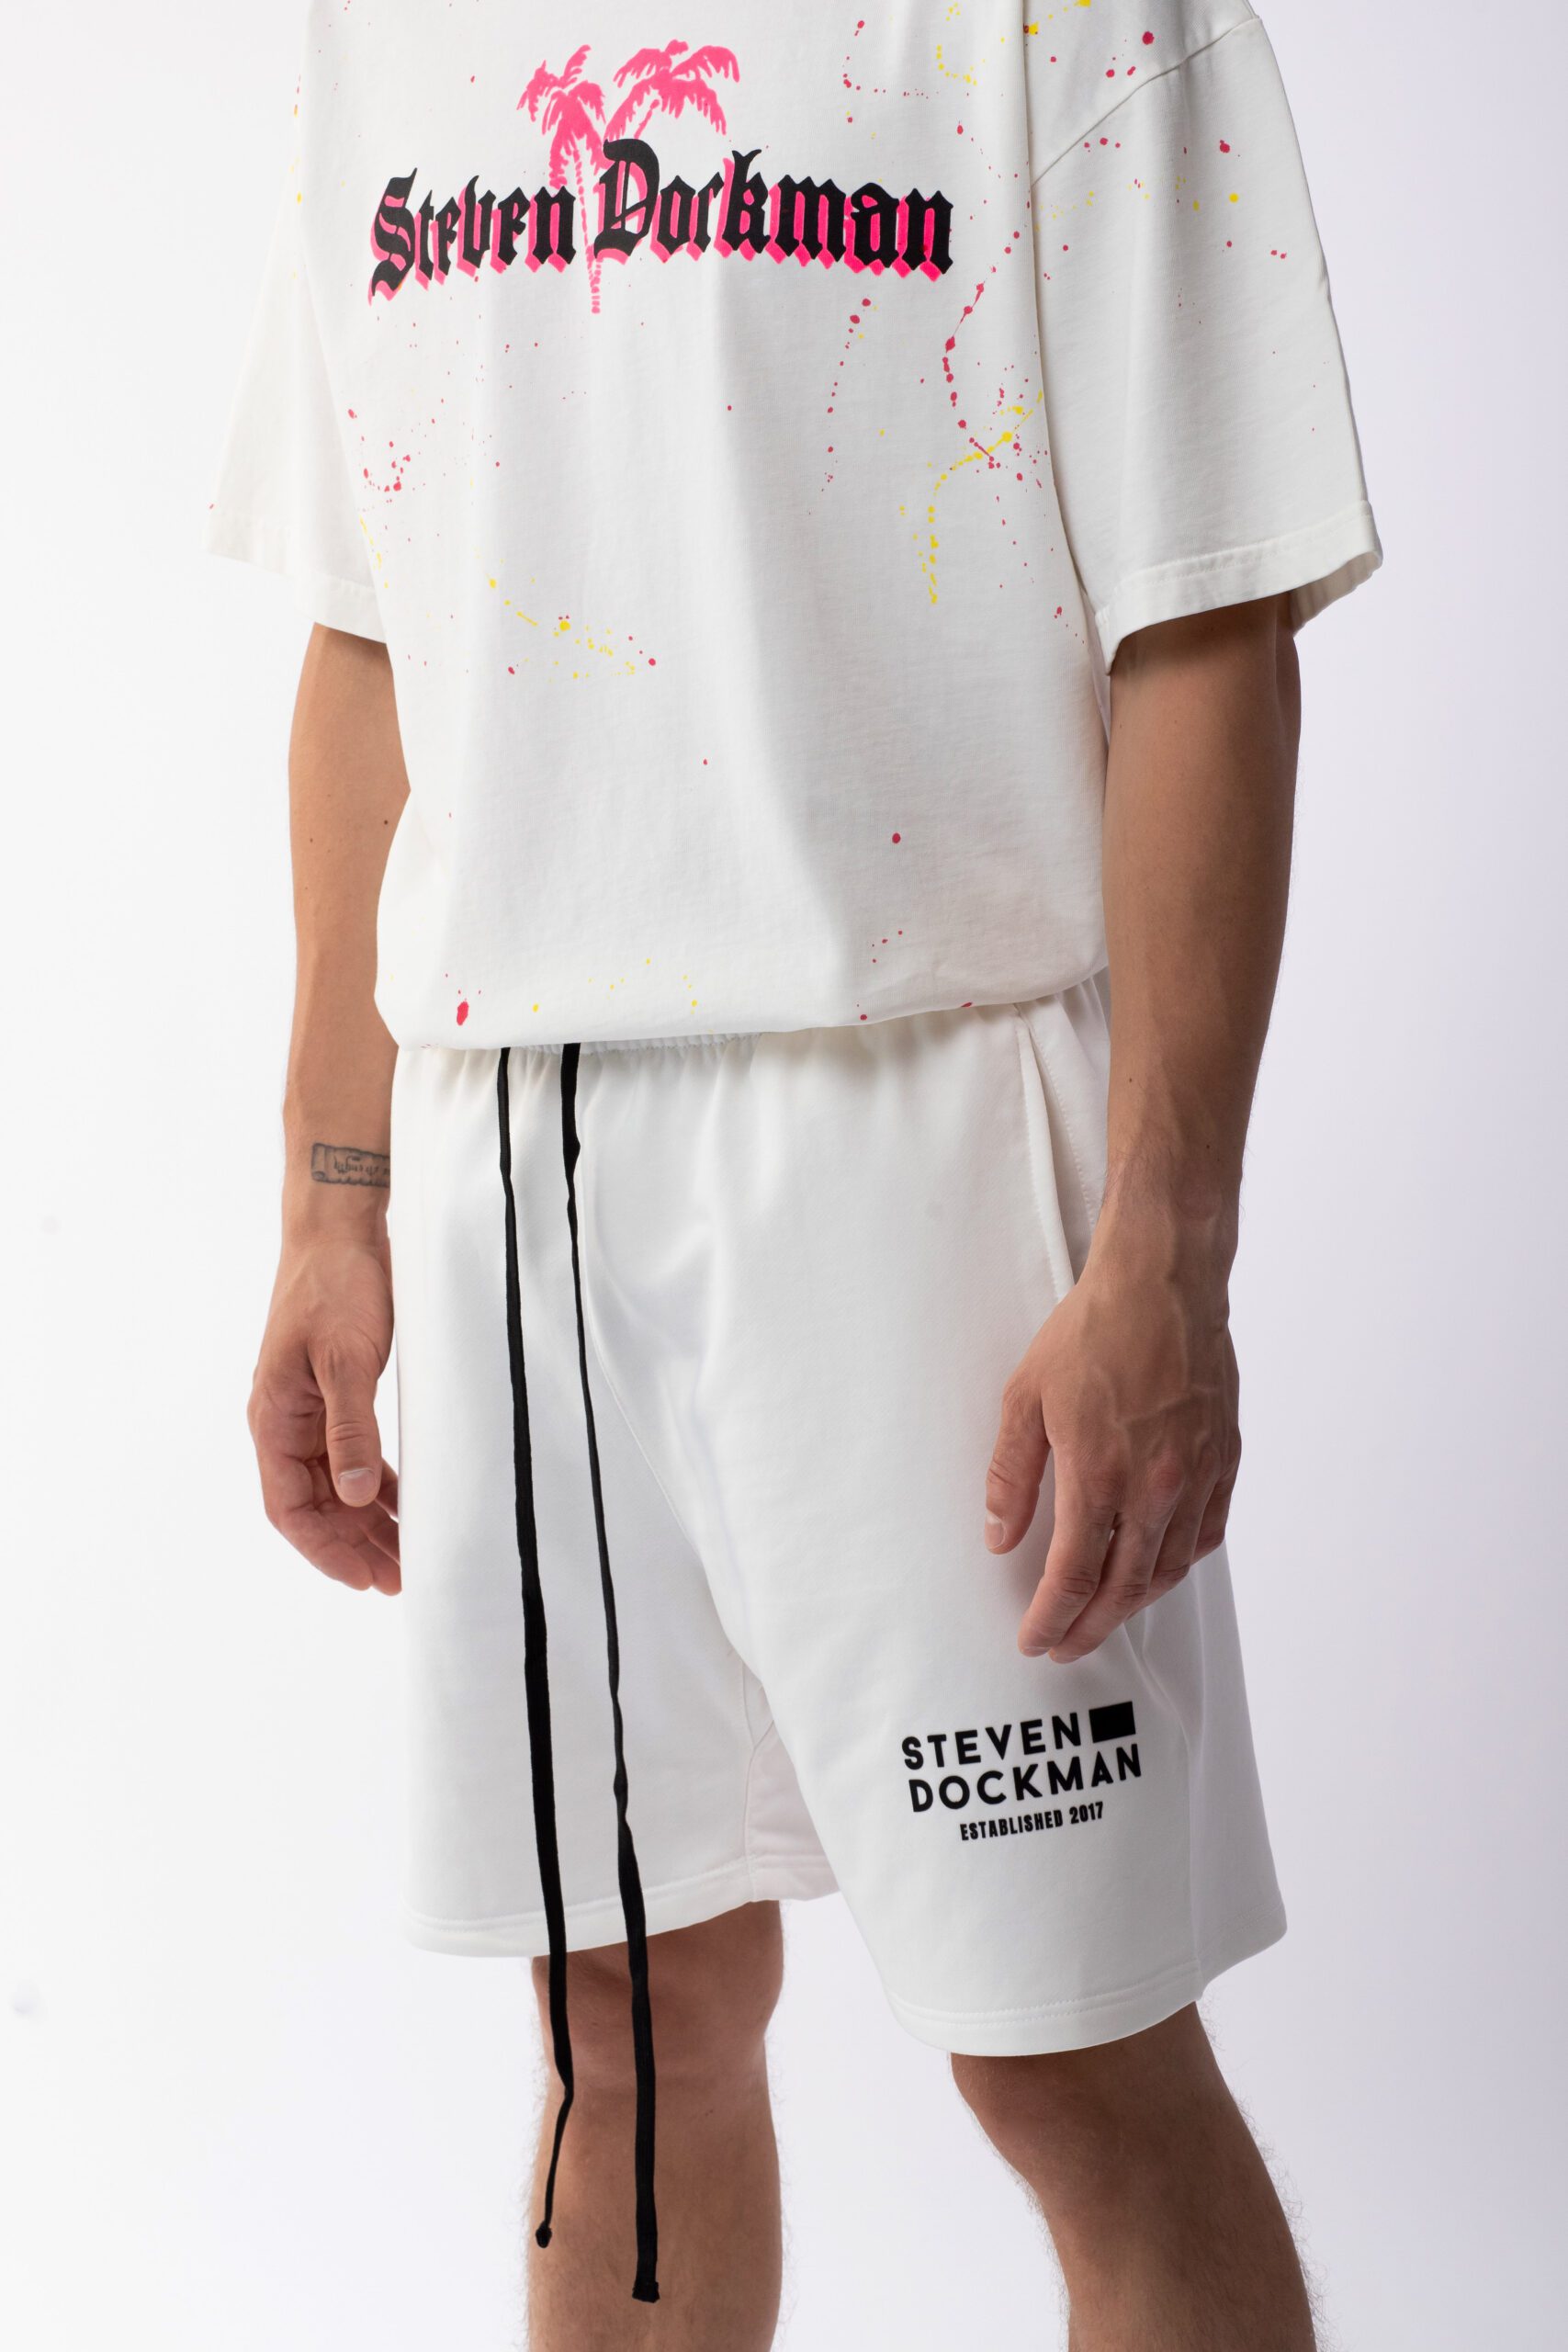 BAGGY SHORTS OFF-WHITE